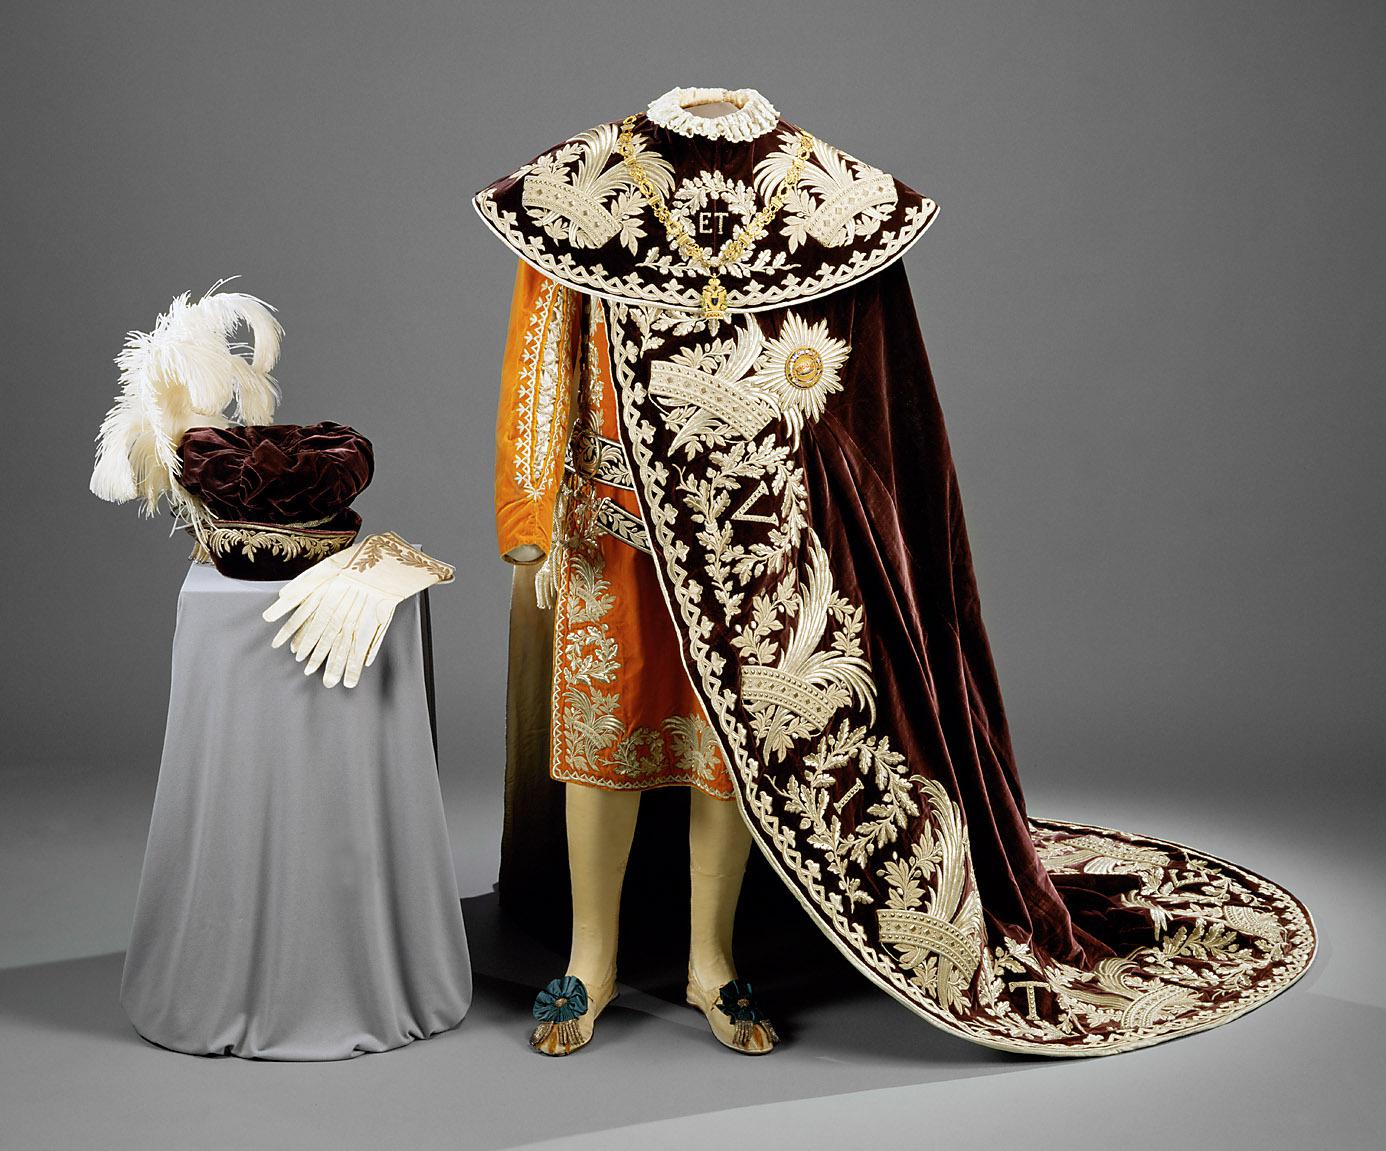 Historical Artifacts - Regalia for a knight 1st class of the Austrian Order of the Iron Crown, 1815-16 u/Jokerang